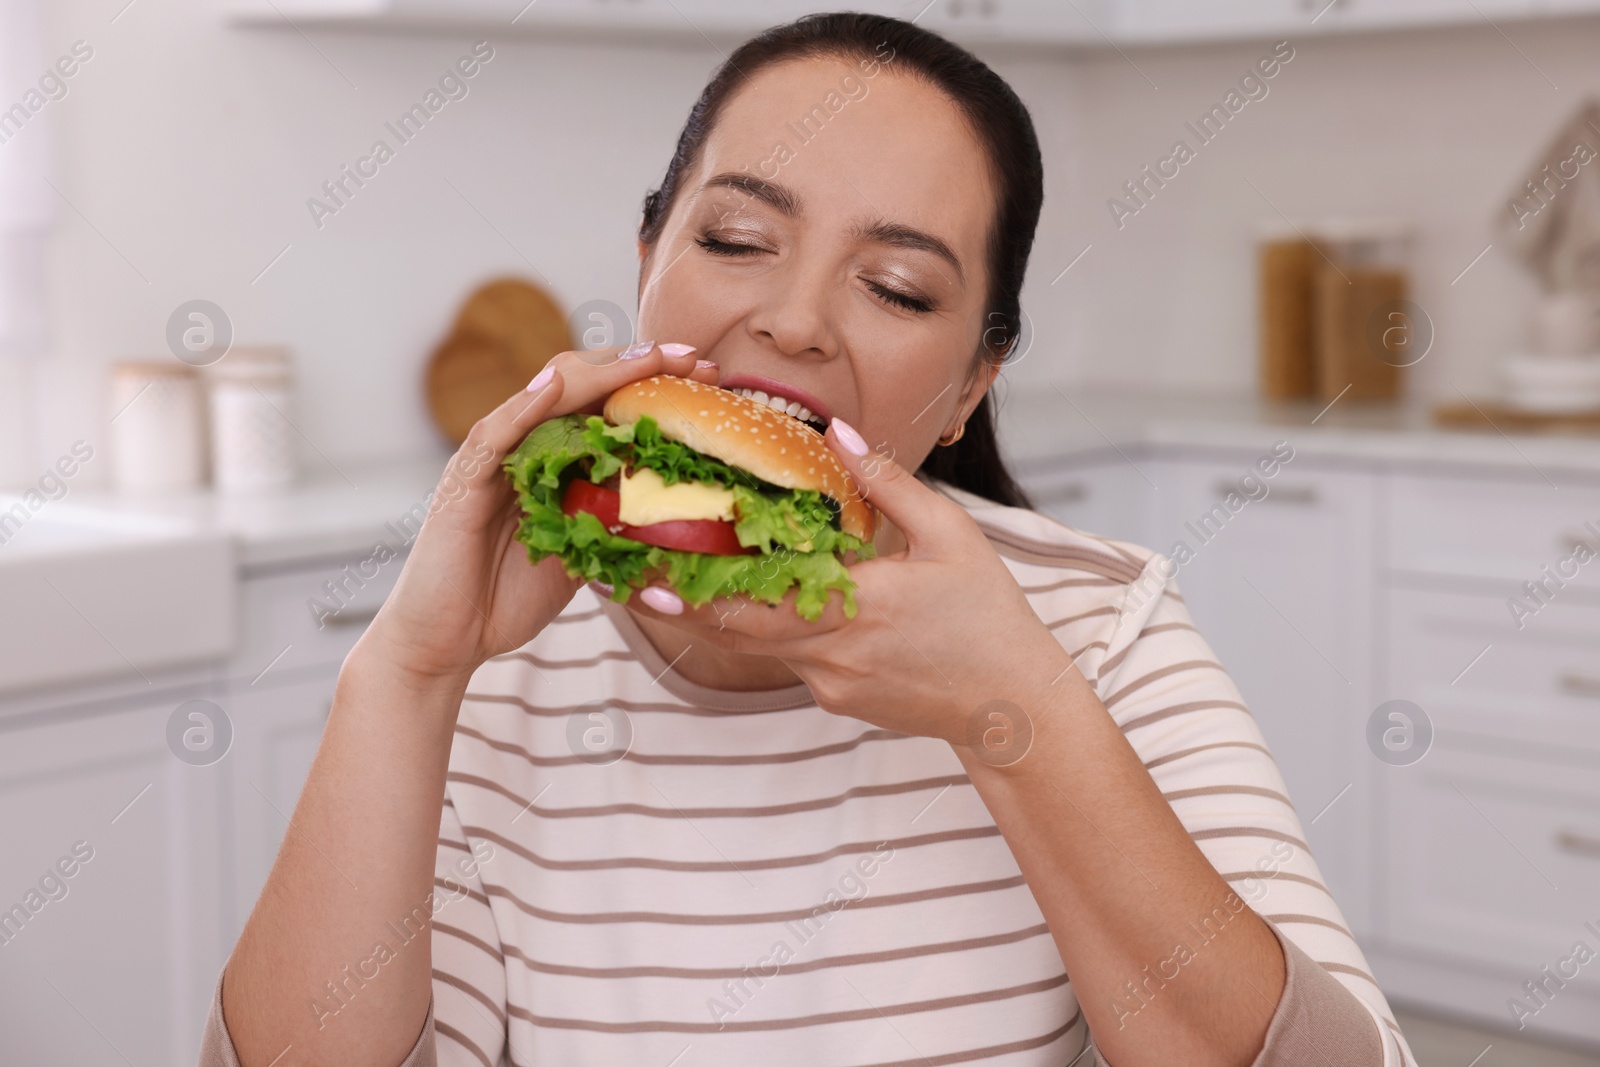 Photo of Overweight woman eating burger in kitchen at home